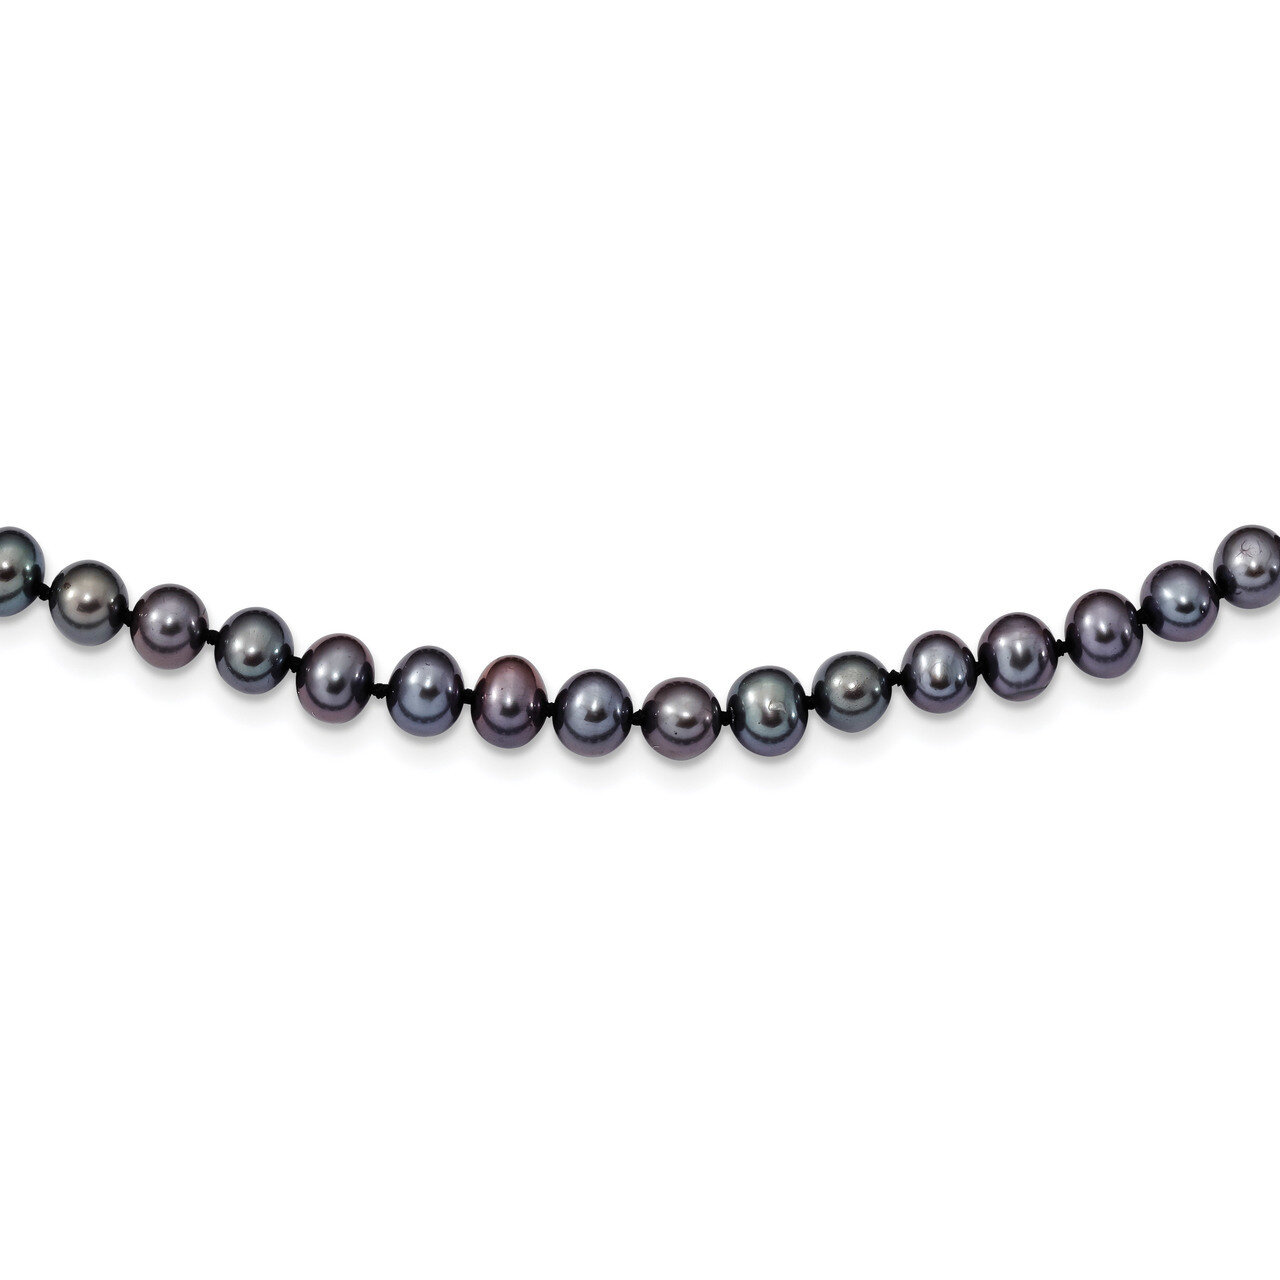 5-6mm Black Cultured Freshwater Pearl Necklace 16 Inch Sterling Silver Rhodium-plated QH5153-16